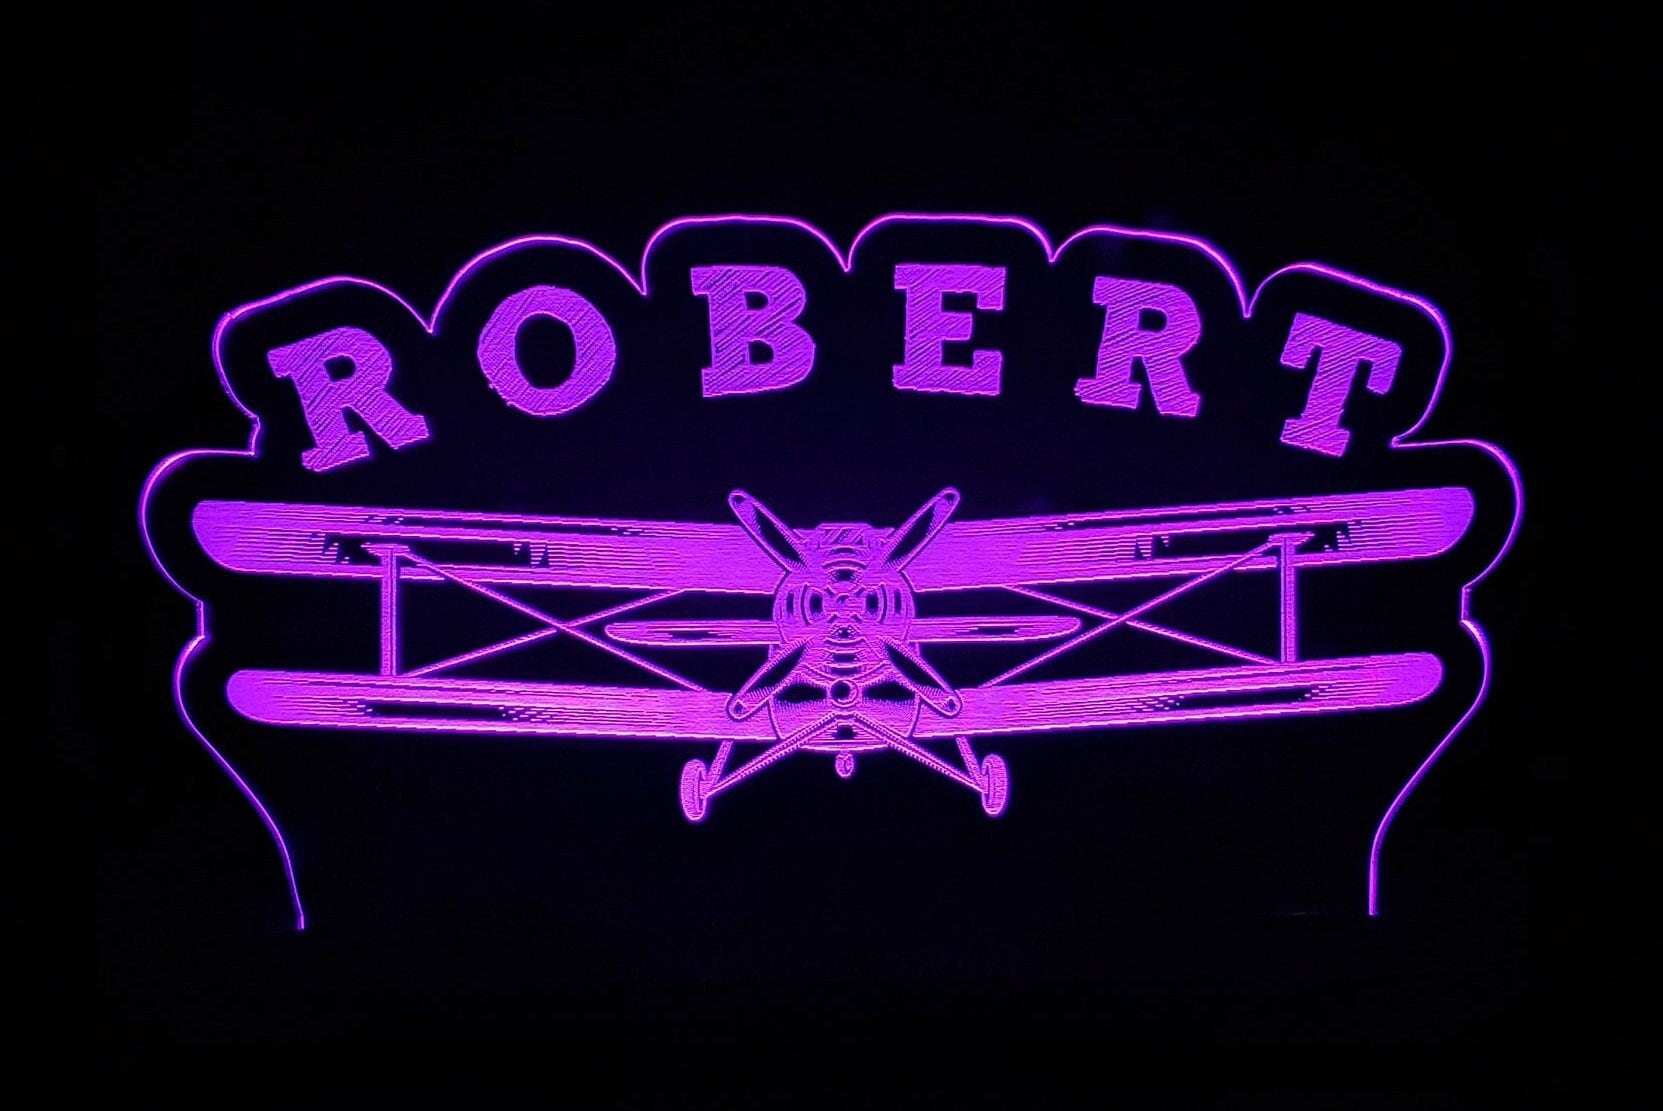 Custom name on biplane LED light lamp/sign with customizable tail number and business name - Neon-like - Free shipping - Made in USA.